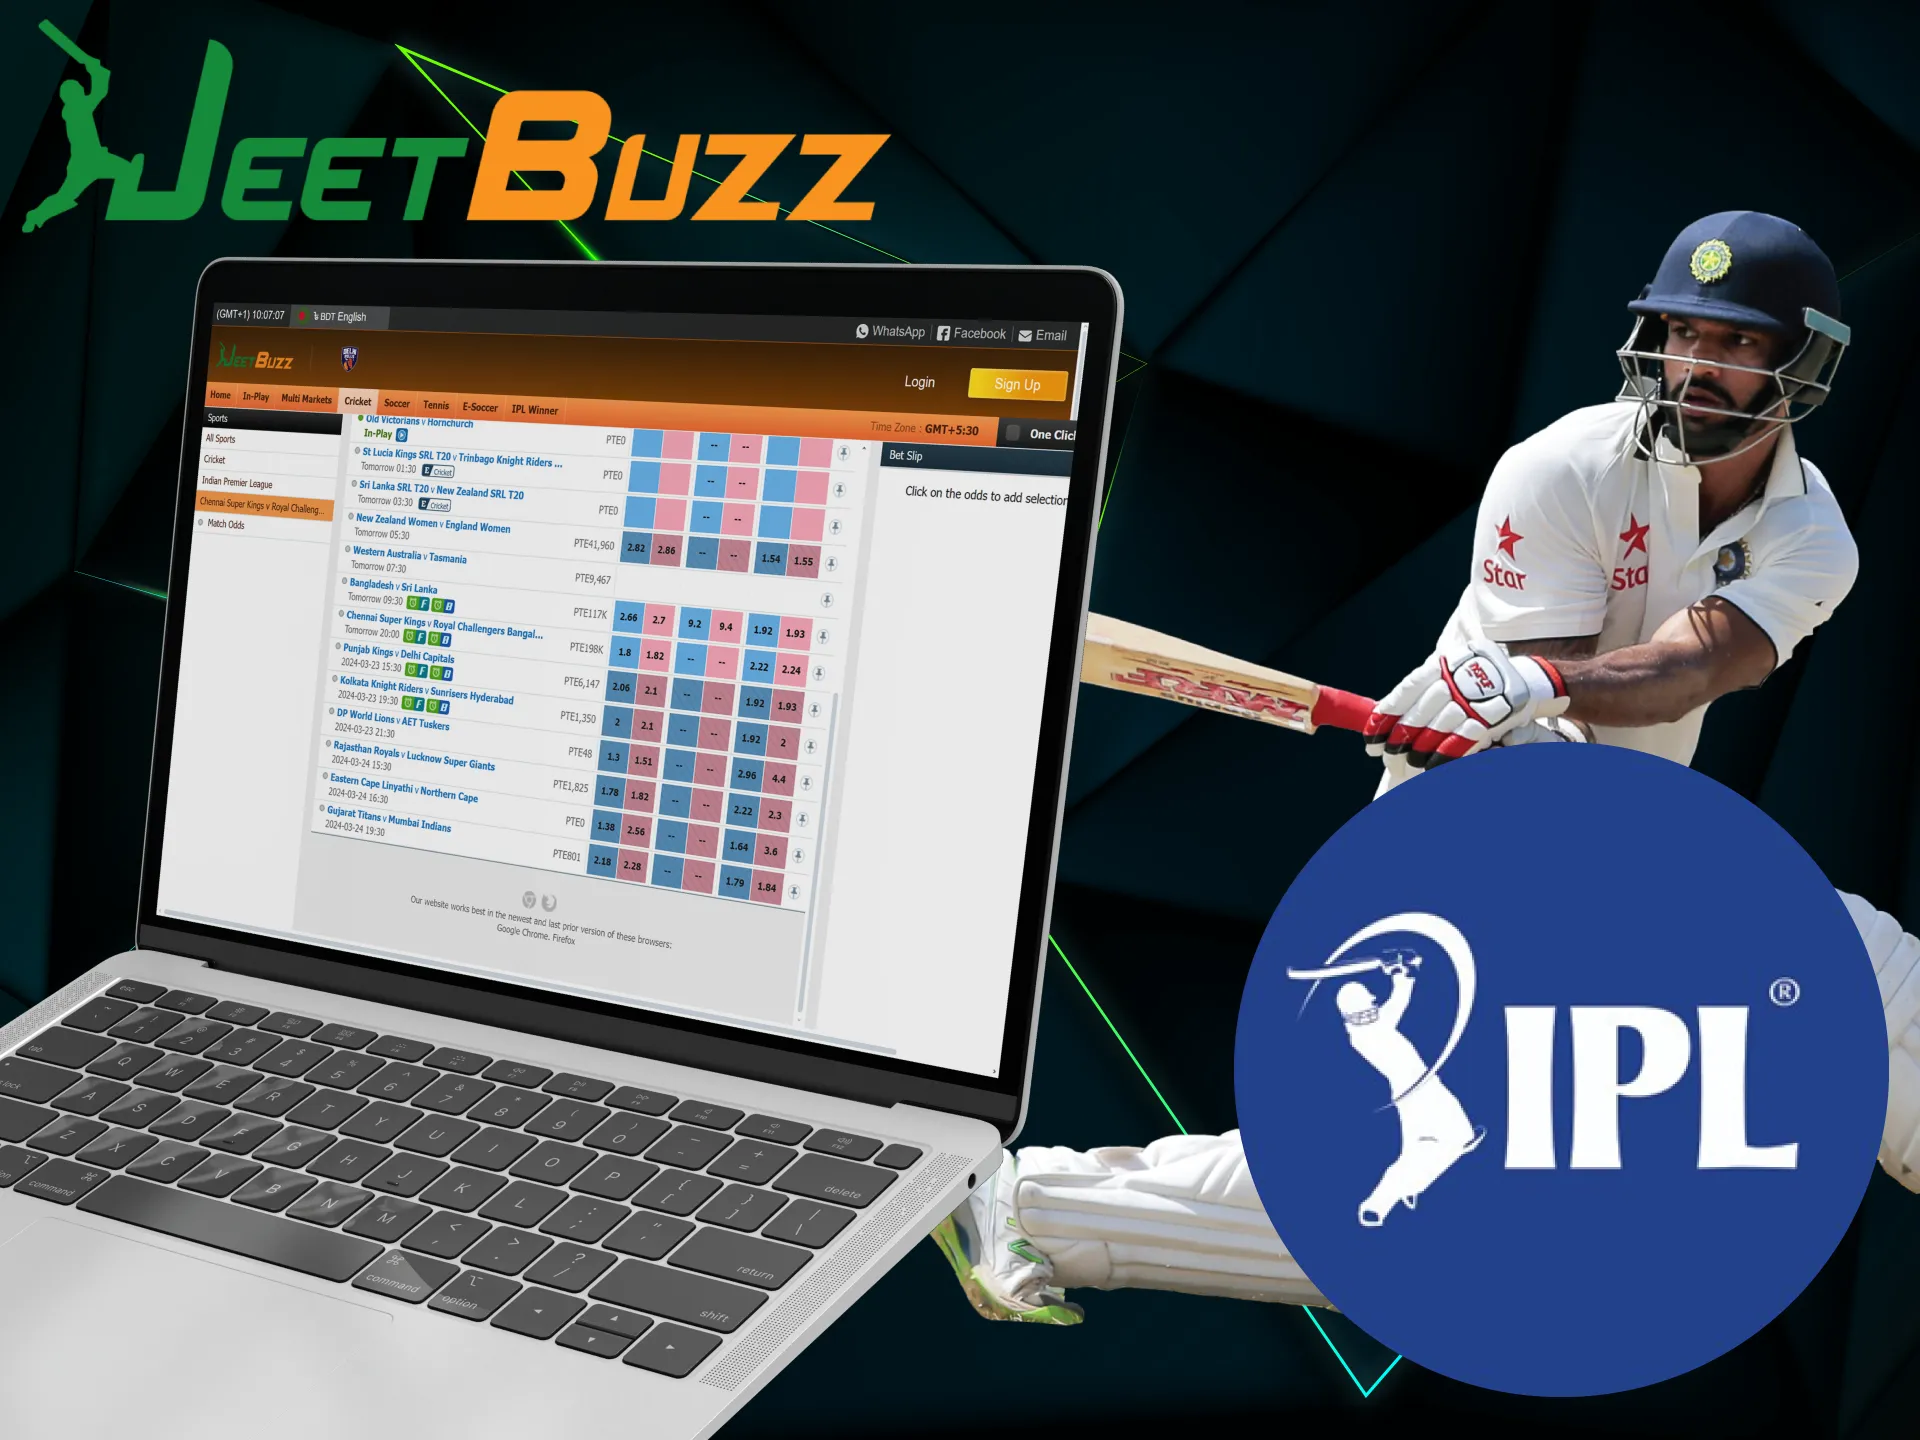 JeetBuzz is a safe and licensed bookmaker for IPL betting.